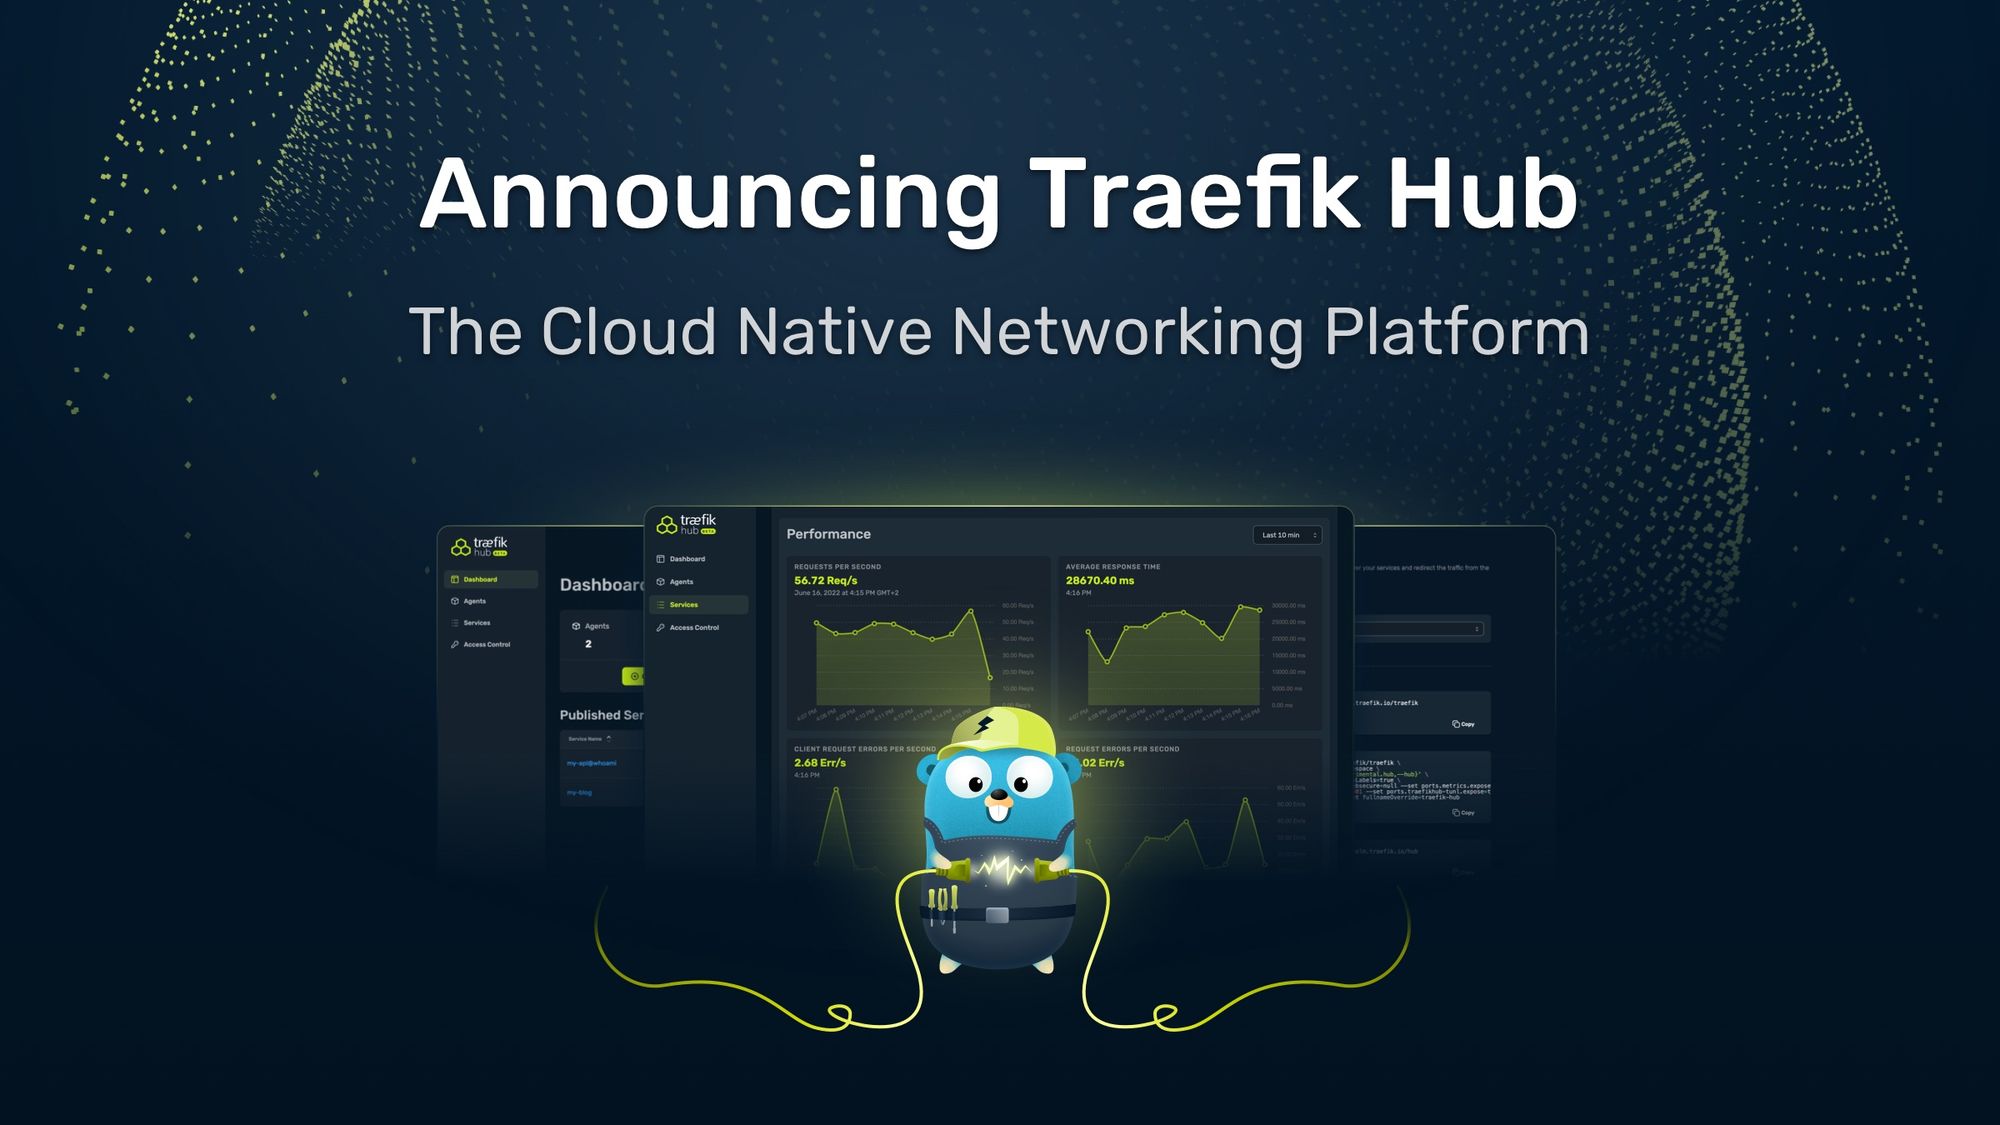 We are thrilled to announce the beta launch of Traefik Hub, a cloud native networking platform that helps publish, secure, and scale containers at the